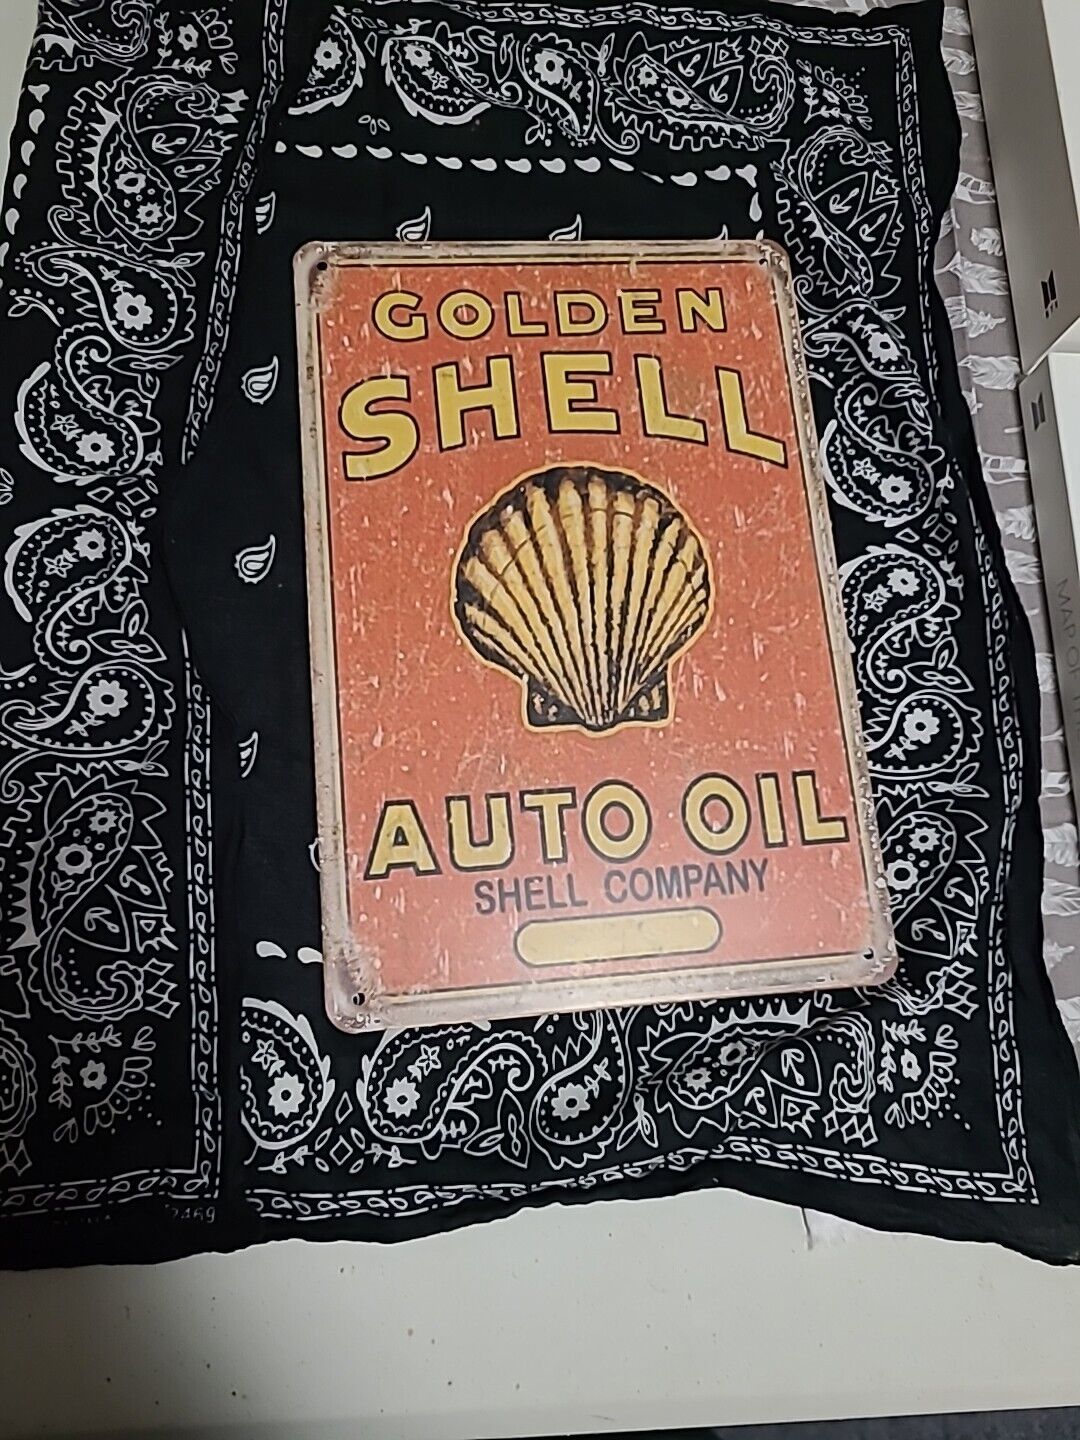 Golden SHELL Auto Oil Shell Company, Garage Reproduction METAL SIGN - 8\